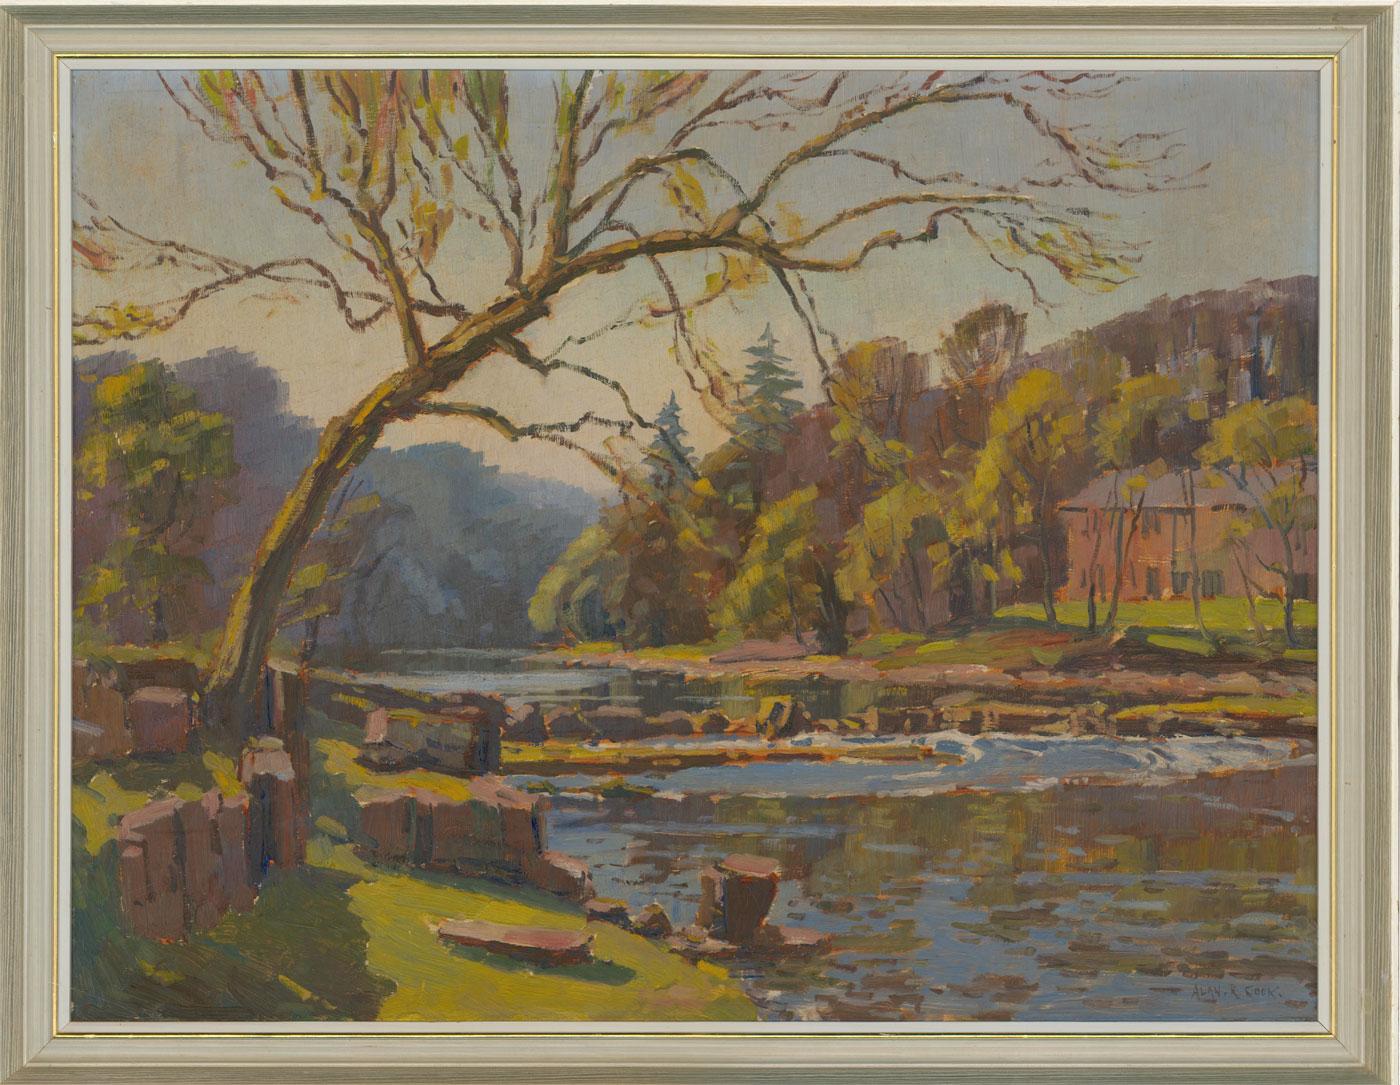 An impressive riverscape study in oils by listed British artist Alan Reid Cook RSMA (1920-1974). The impressionistic brushstrokes and attention to form and tone is typical of Cook's expressive style. Well presented in a modern frame. Signed. On